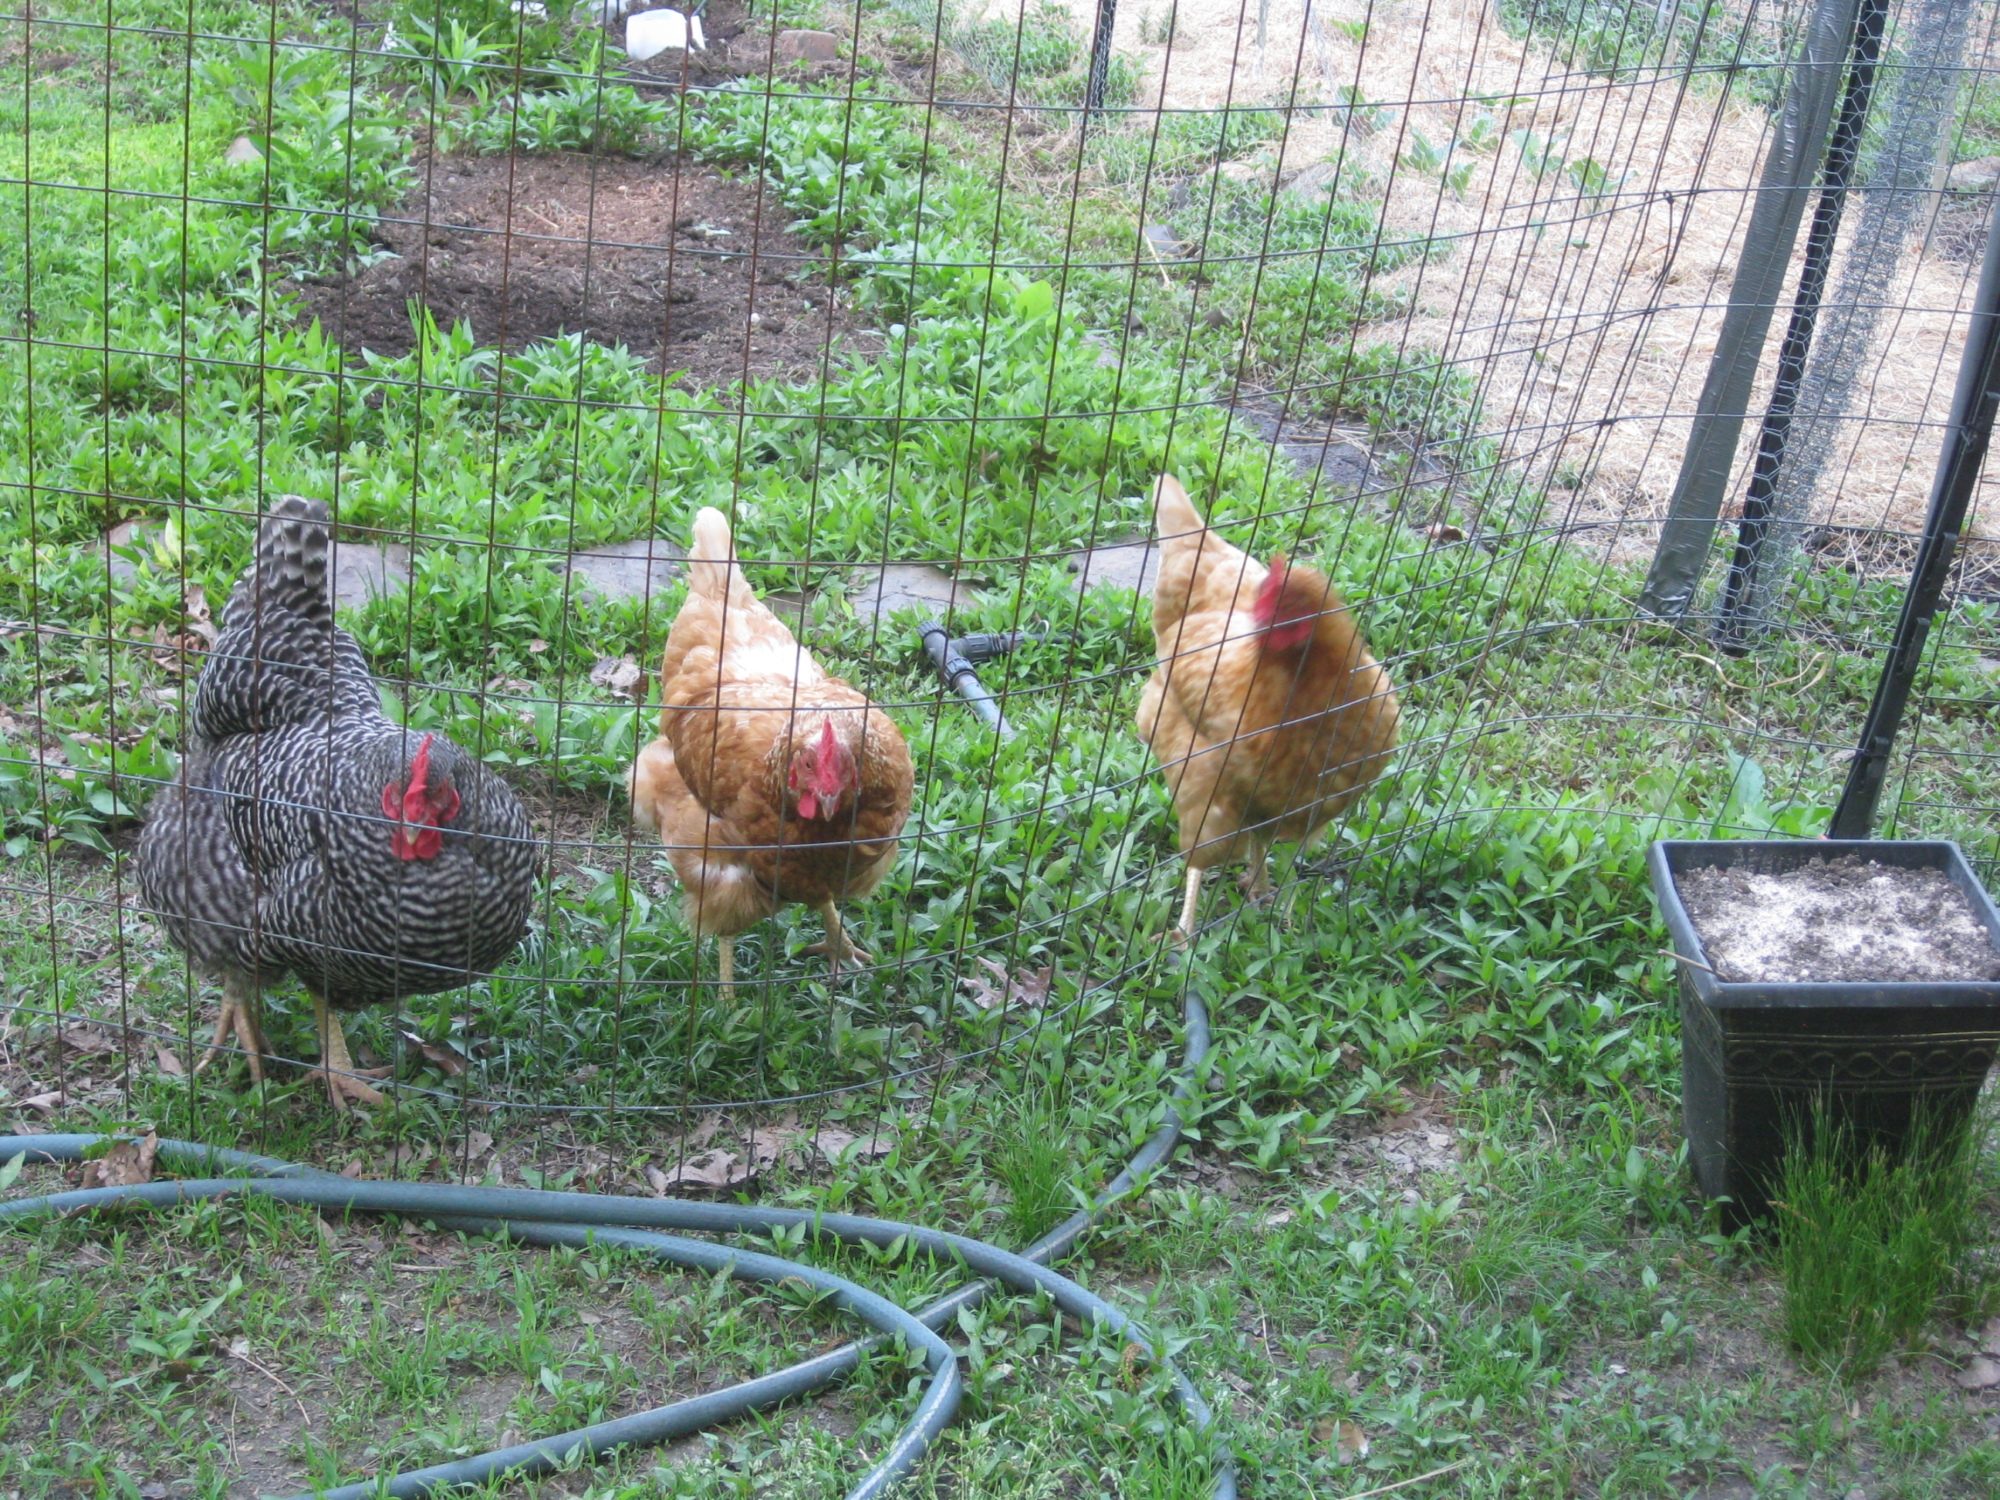 Black one is a Barred Plymouth Rock